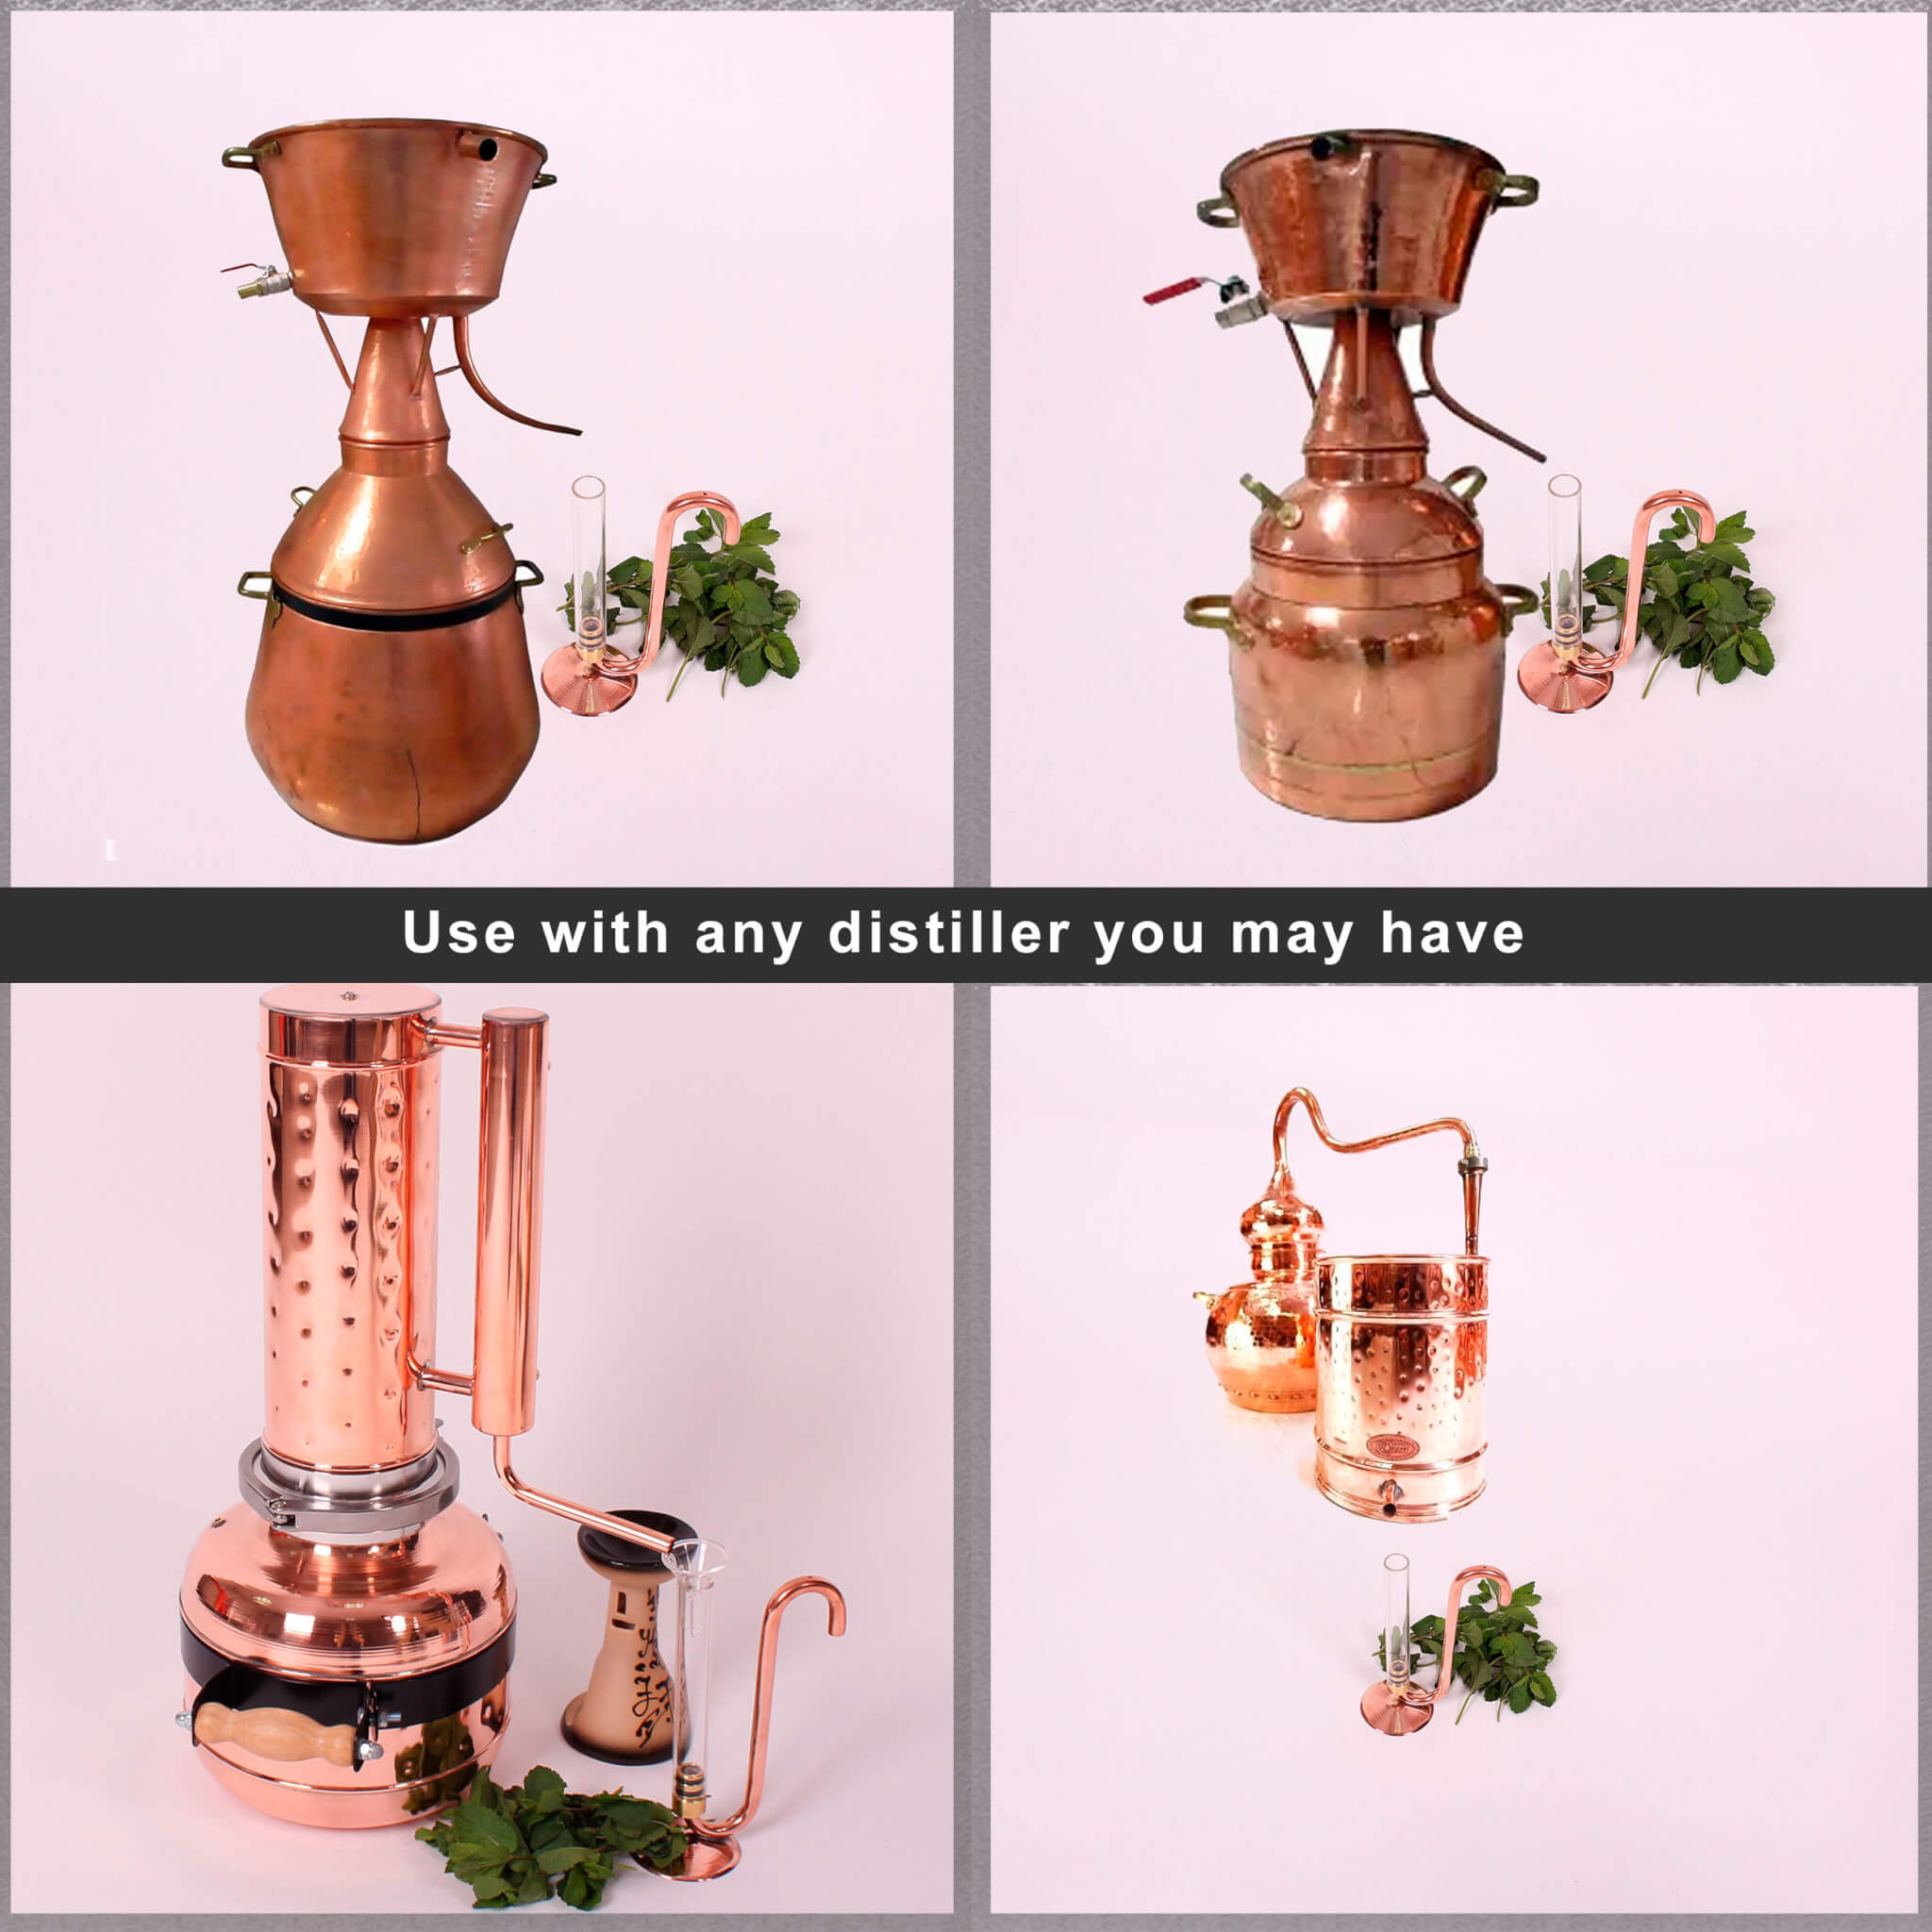 Oil separator to use with alquitara, alembic, or any other distiller